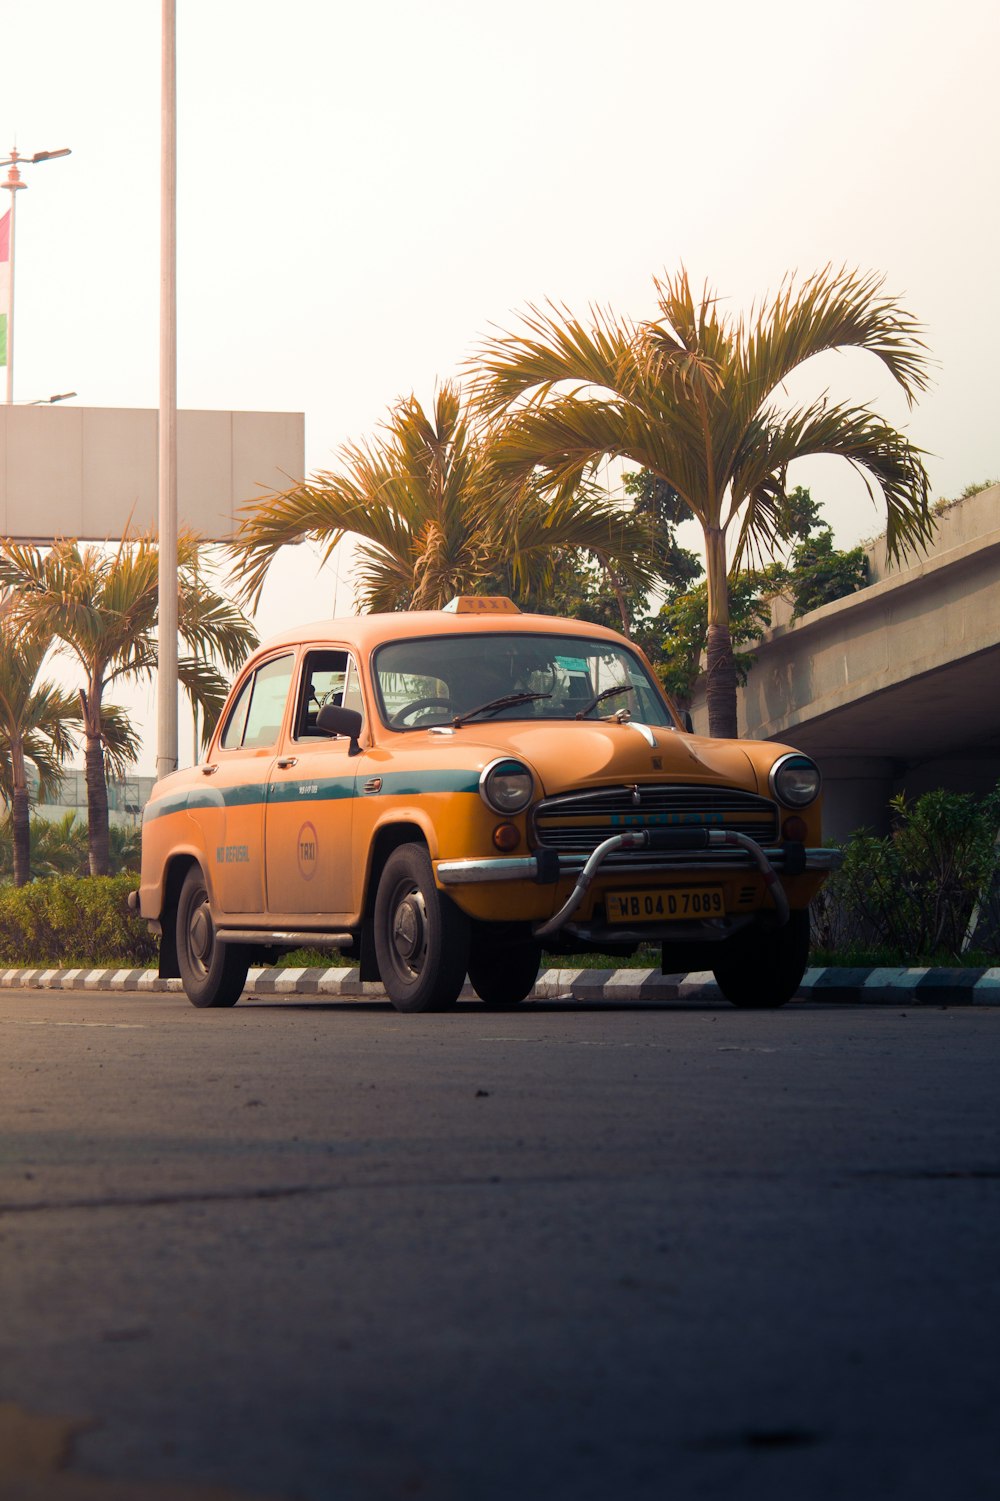 yellow and black chevrolet classic car on road near palm trees during daytime